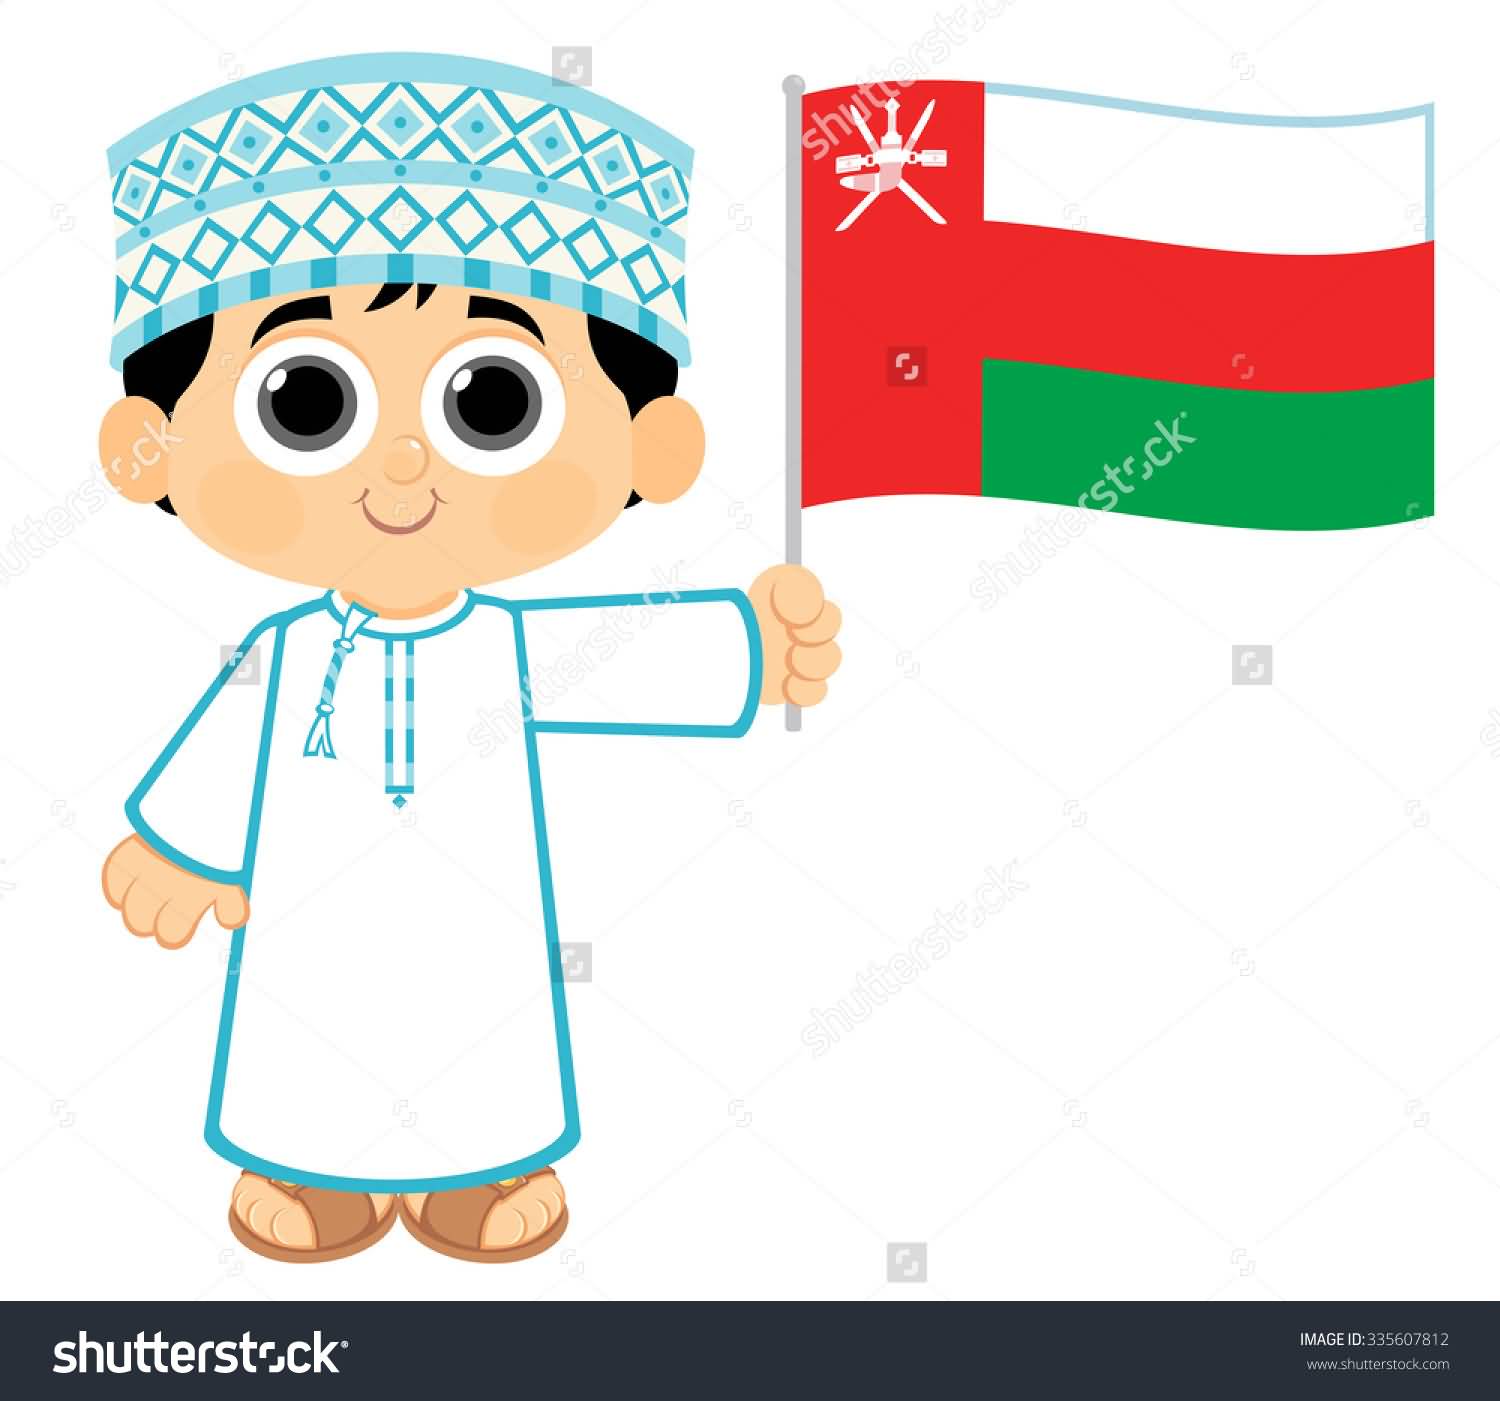 A Kid With Oman Flag In Hand Wishing You Happy National Day Illustration